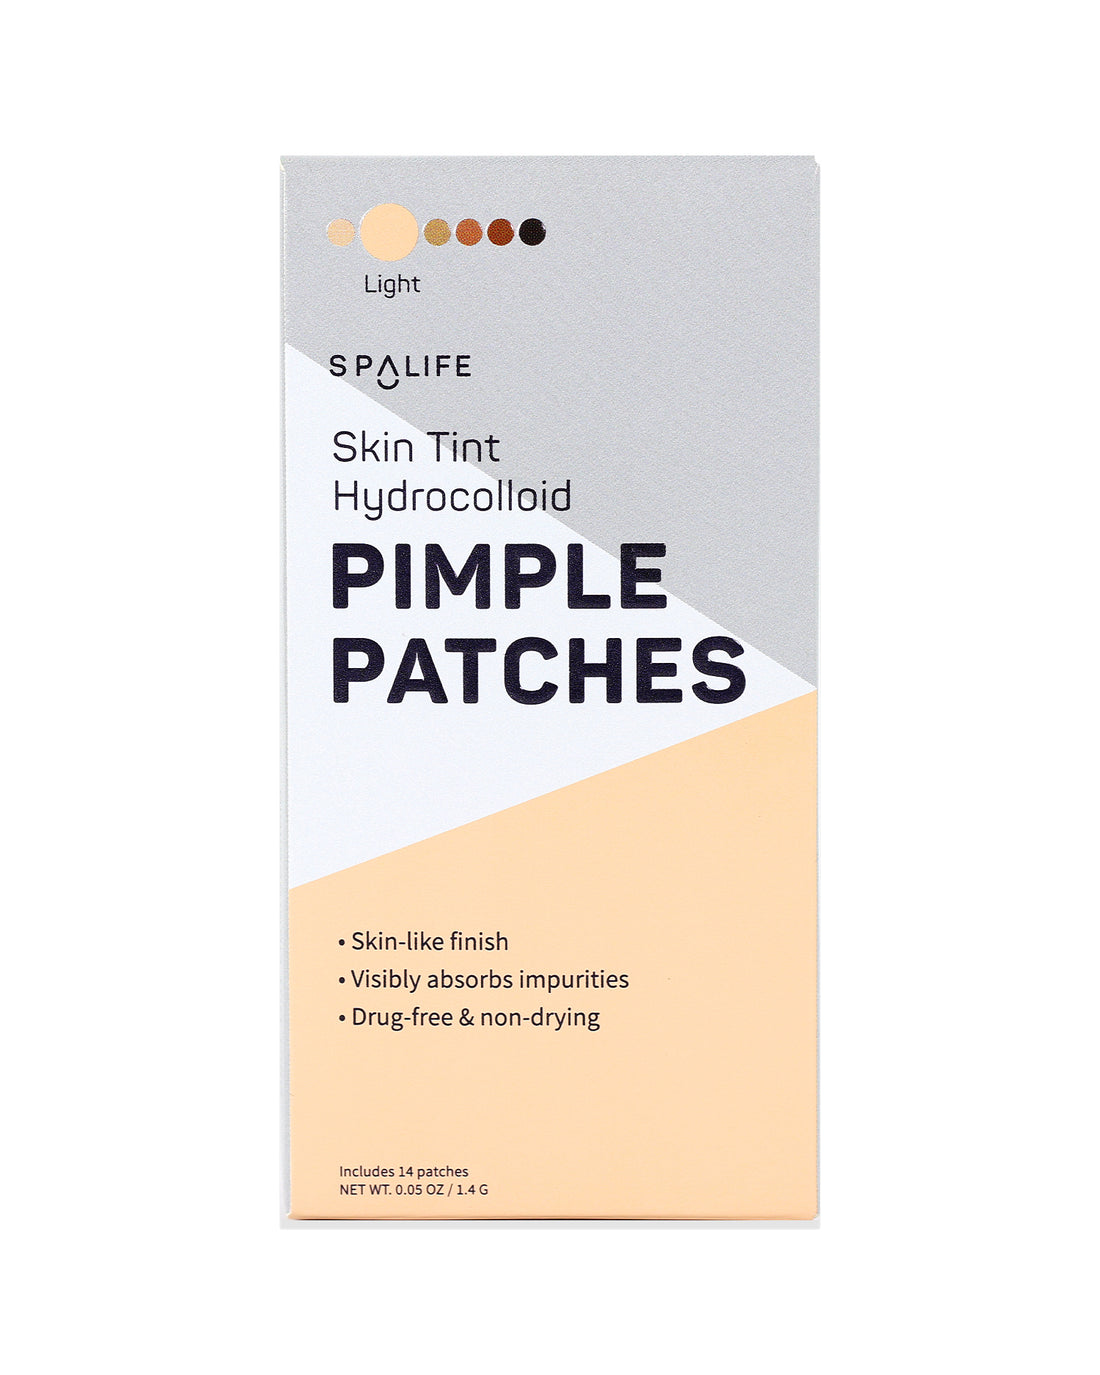 Skin_tint_pimple_patches_packe-870